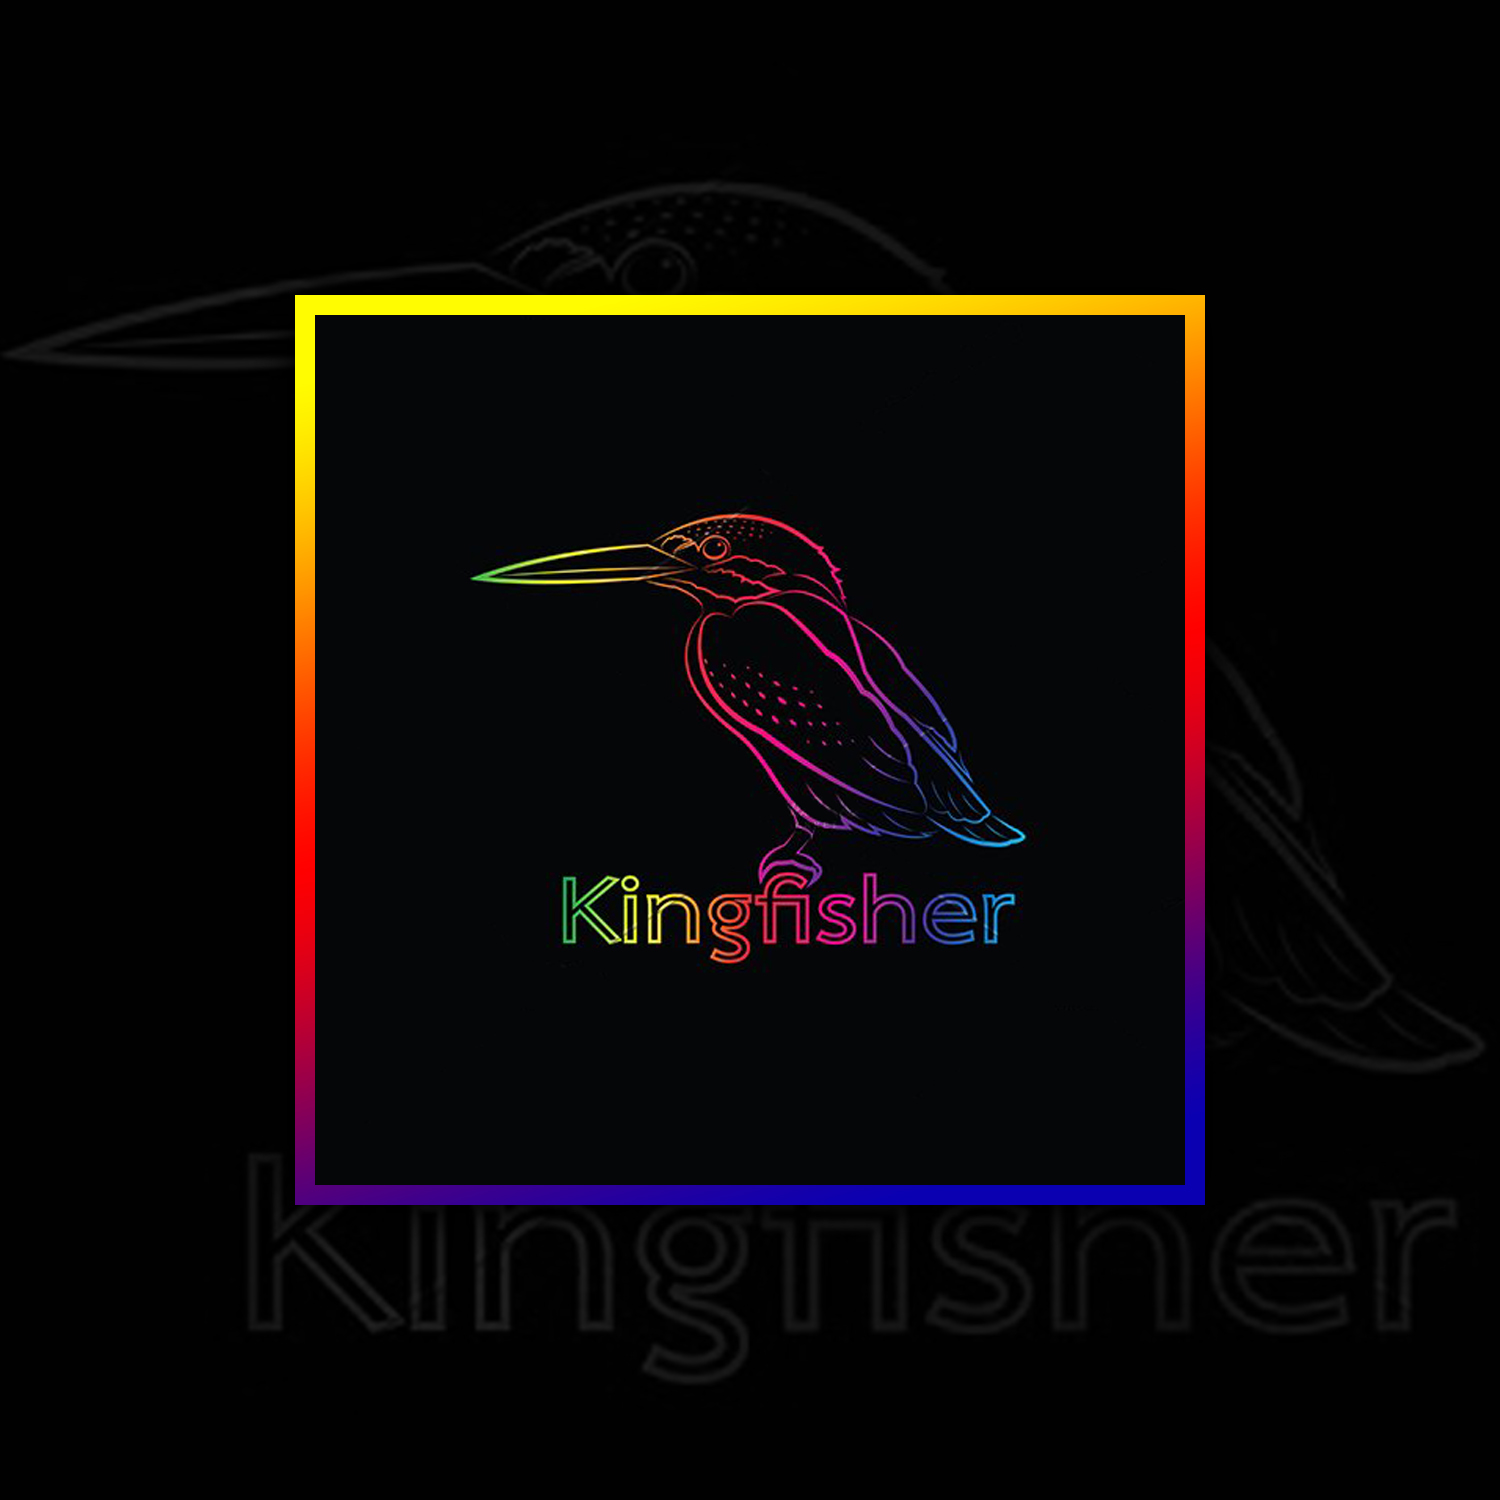 Images with vector of a kingfisher bird.